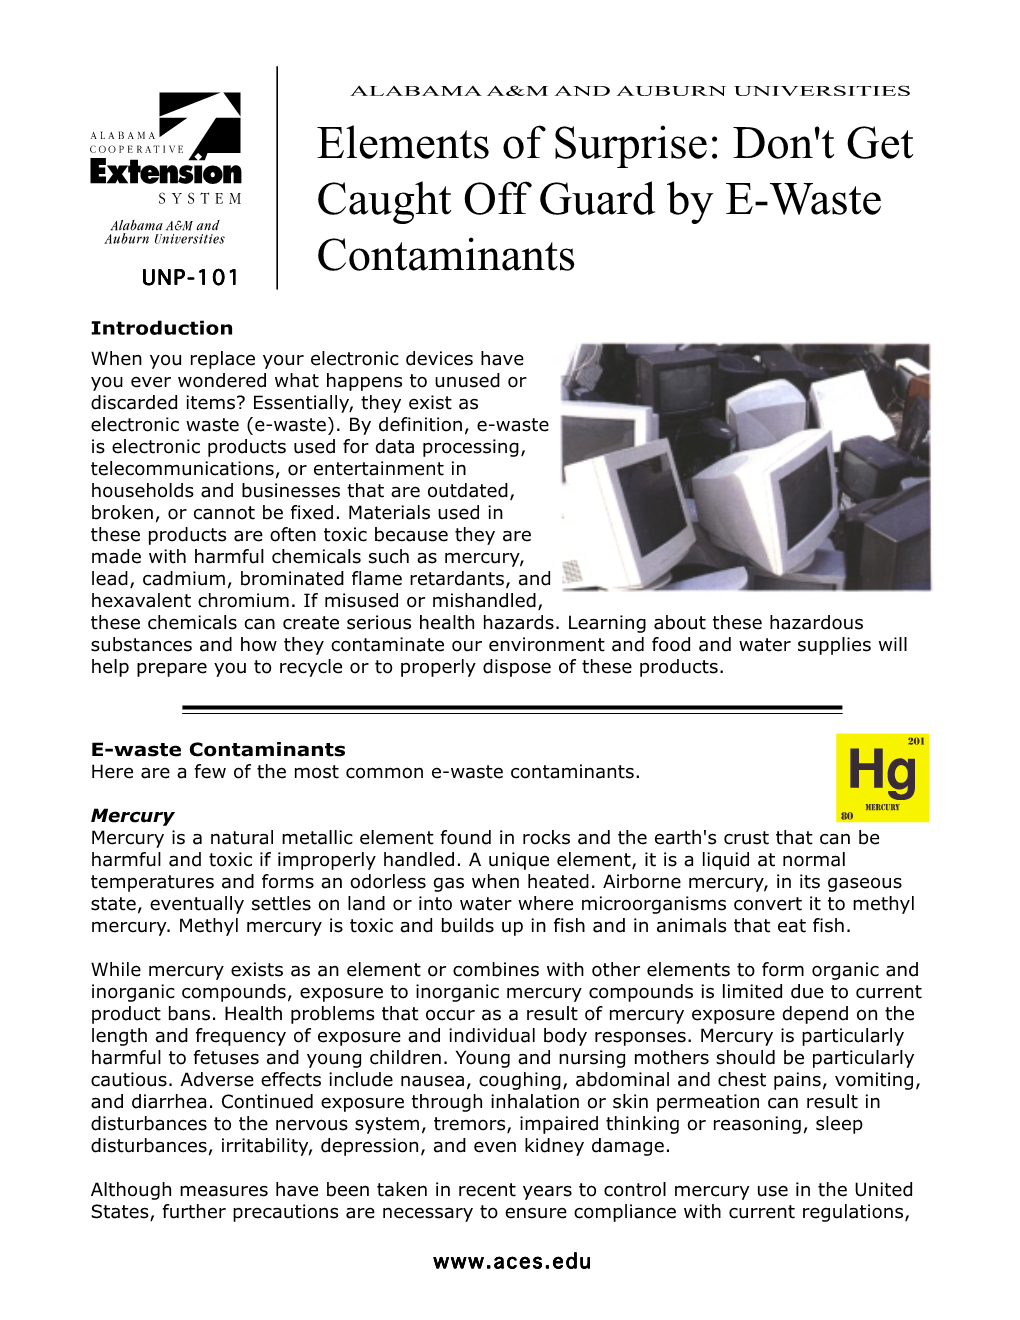 Elements of Surprise: Don't Get Caught Off Guard by E-Waste